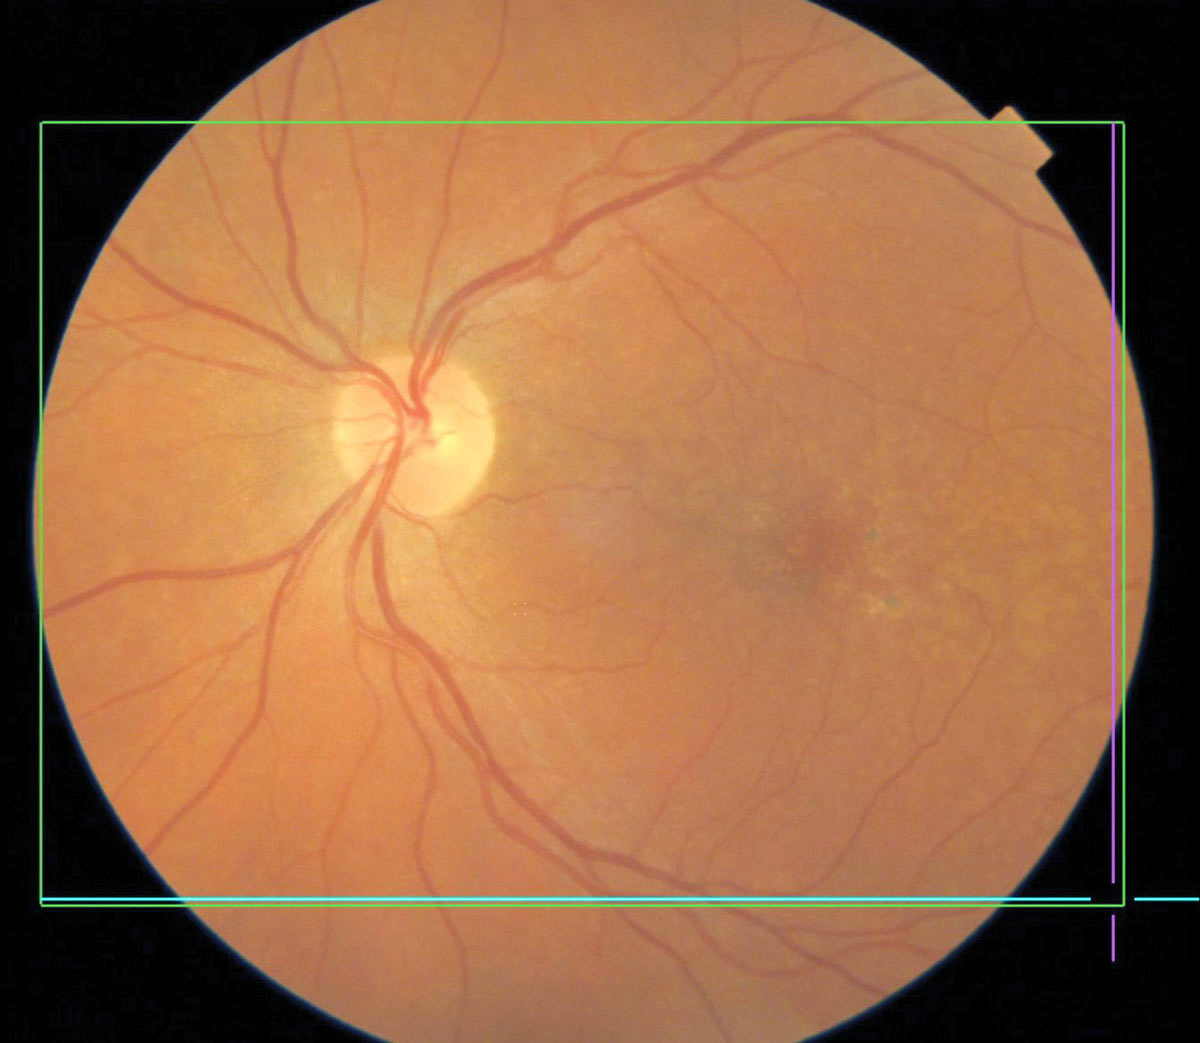 Patients with macular degeneration are at increased risk for dementia and Alzheimer's, study finds. 